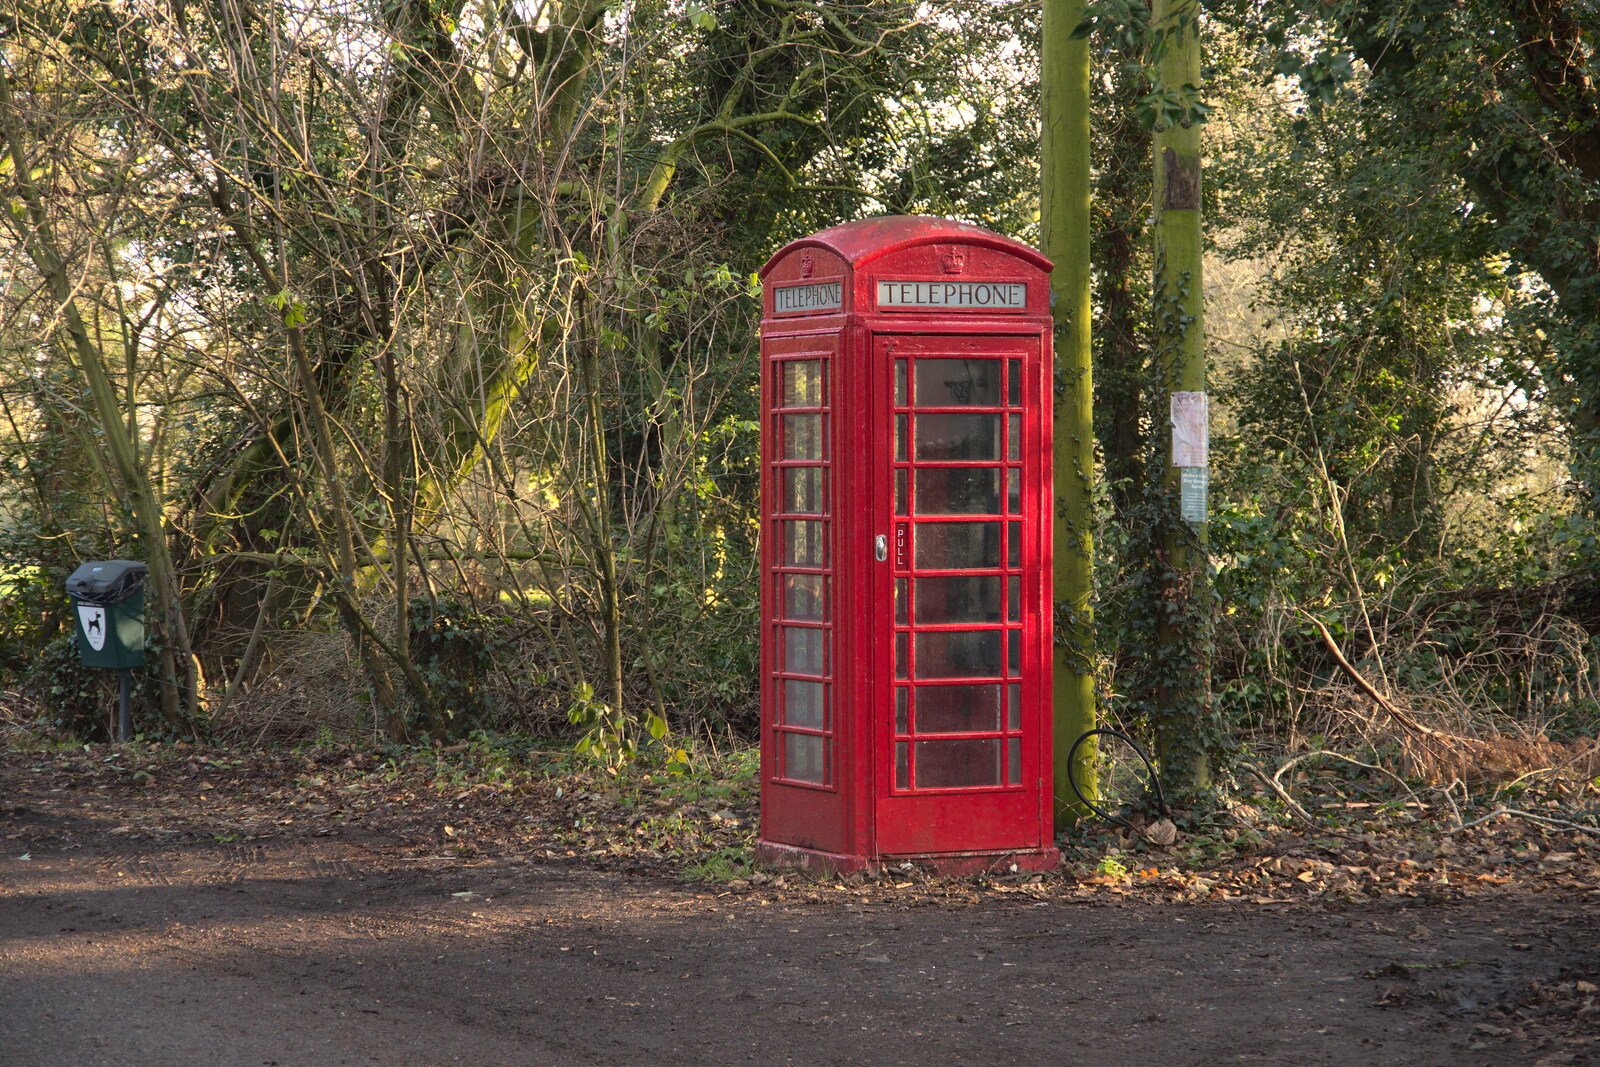 Winter Walks around Brome and Hoxne, Suffolk - 2nd January 2023: The unused K6 phonebox in Brome Street